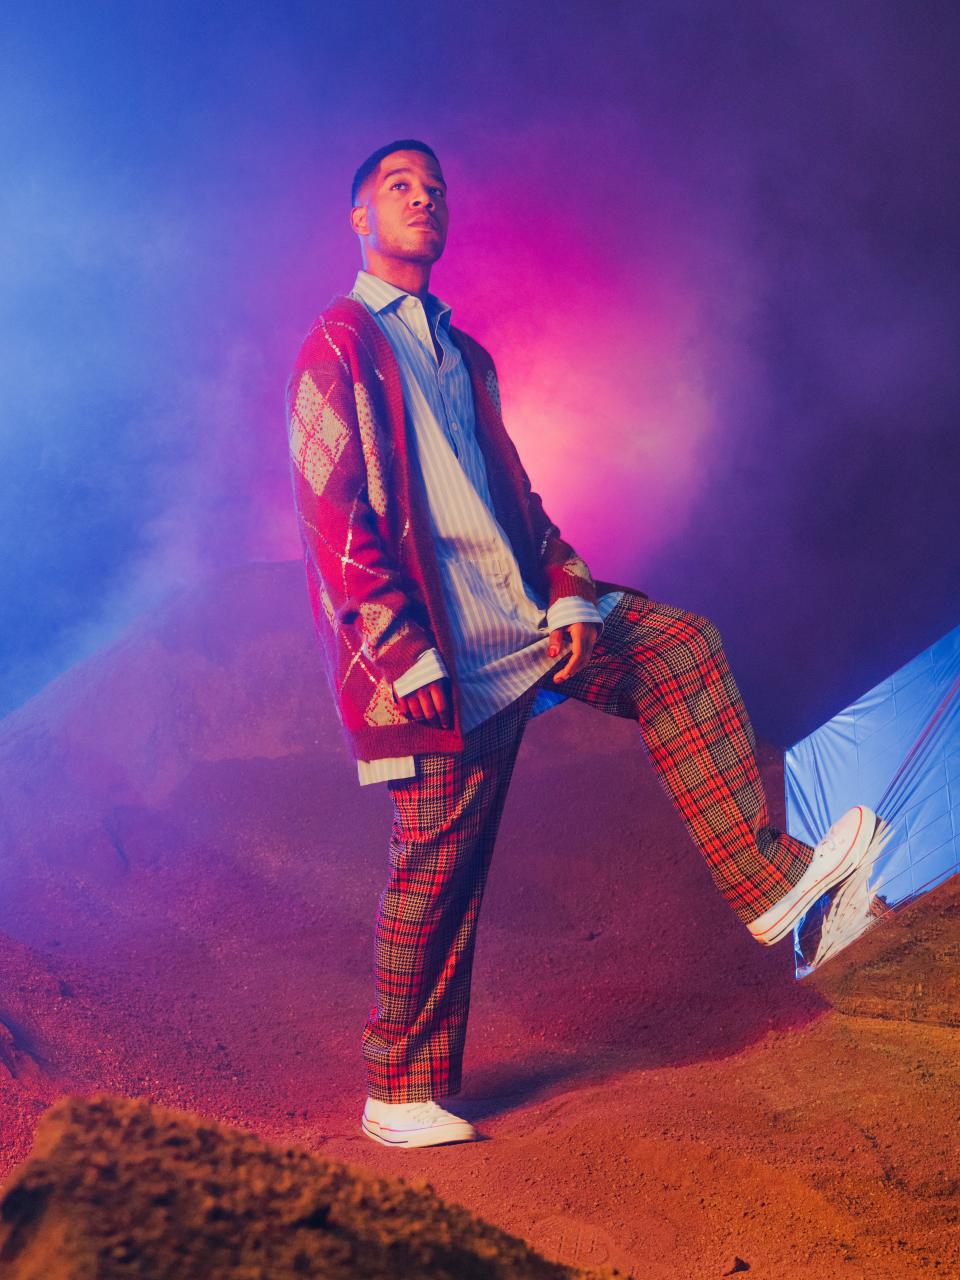 Kid Cudi has been plenty outspoken about his struggles. He’s variously battled critics, depression, and, at times, Kanye West. But now, as he re-emerges with a new creative optimism, the 34-year-old is blissfully focused on something much more dynamic: his future.